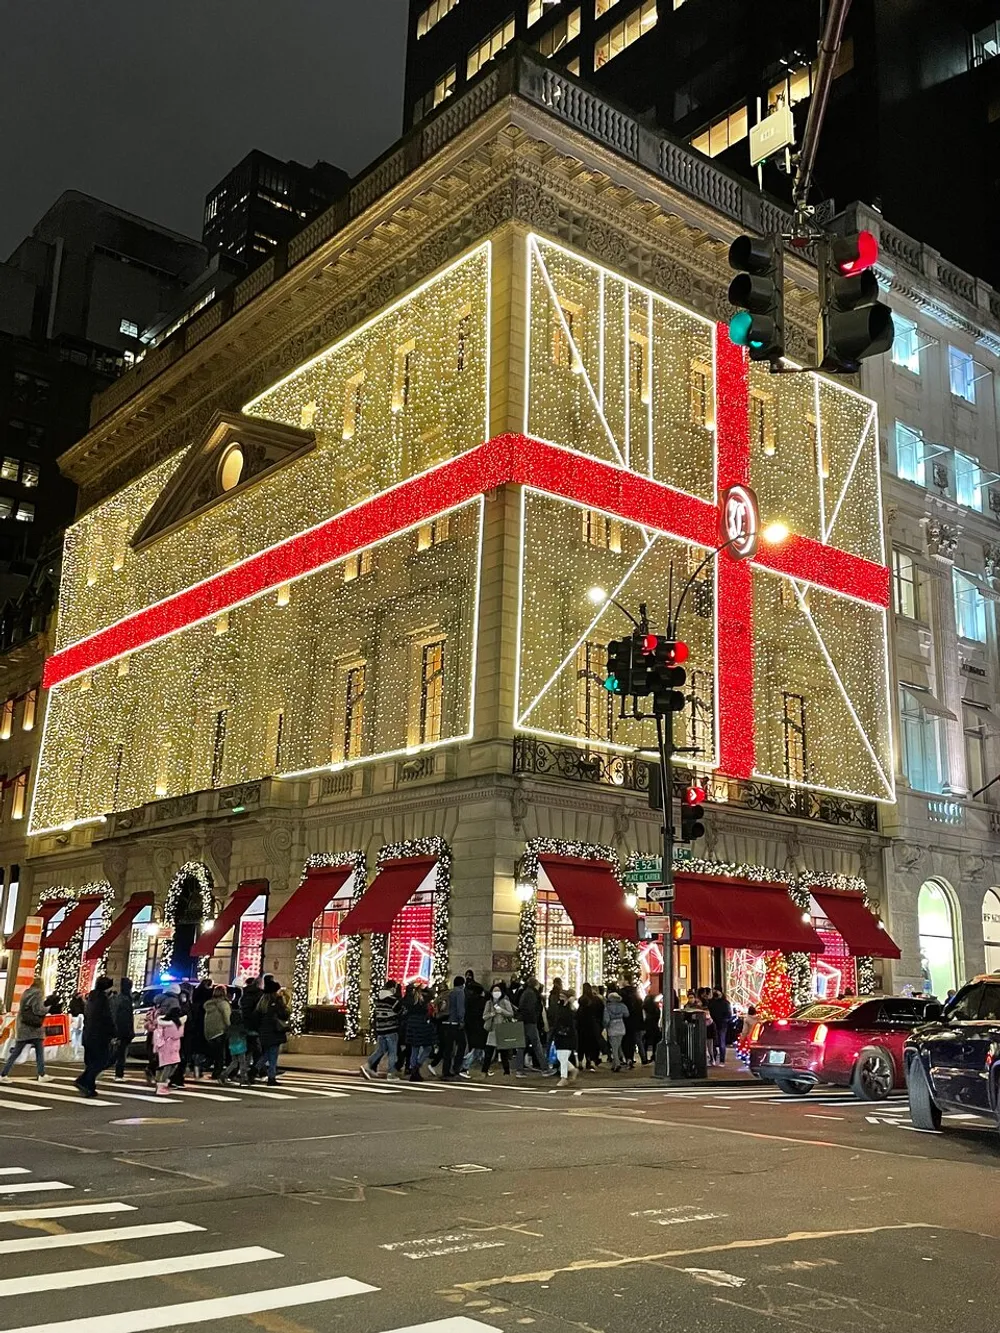 A building is extravagantly adorned with holiday lighting and decorations as pedestrians walk by on the street corner at night